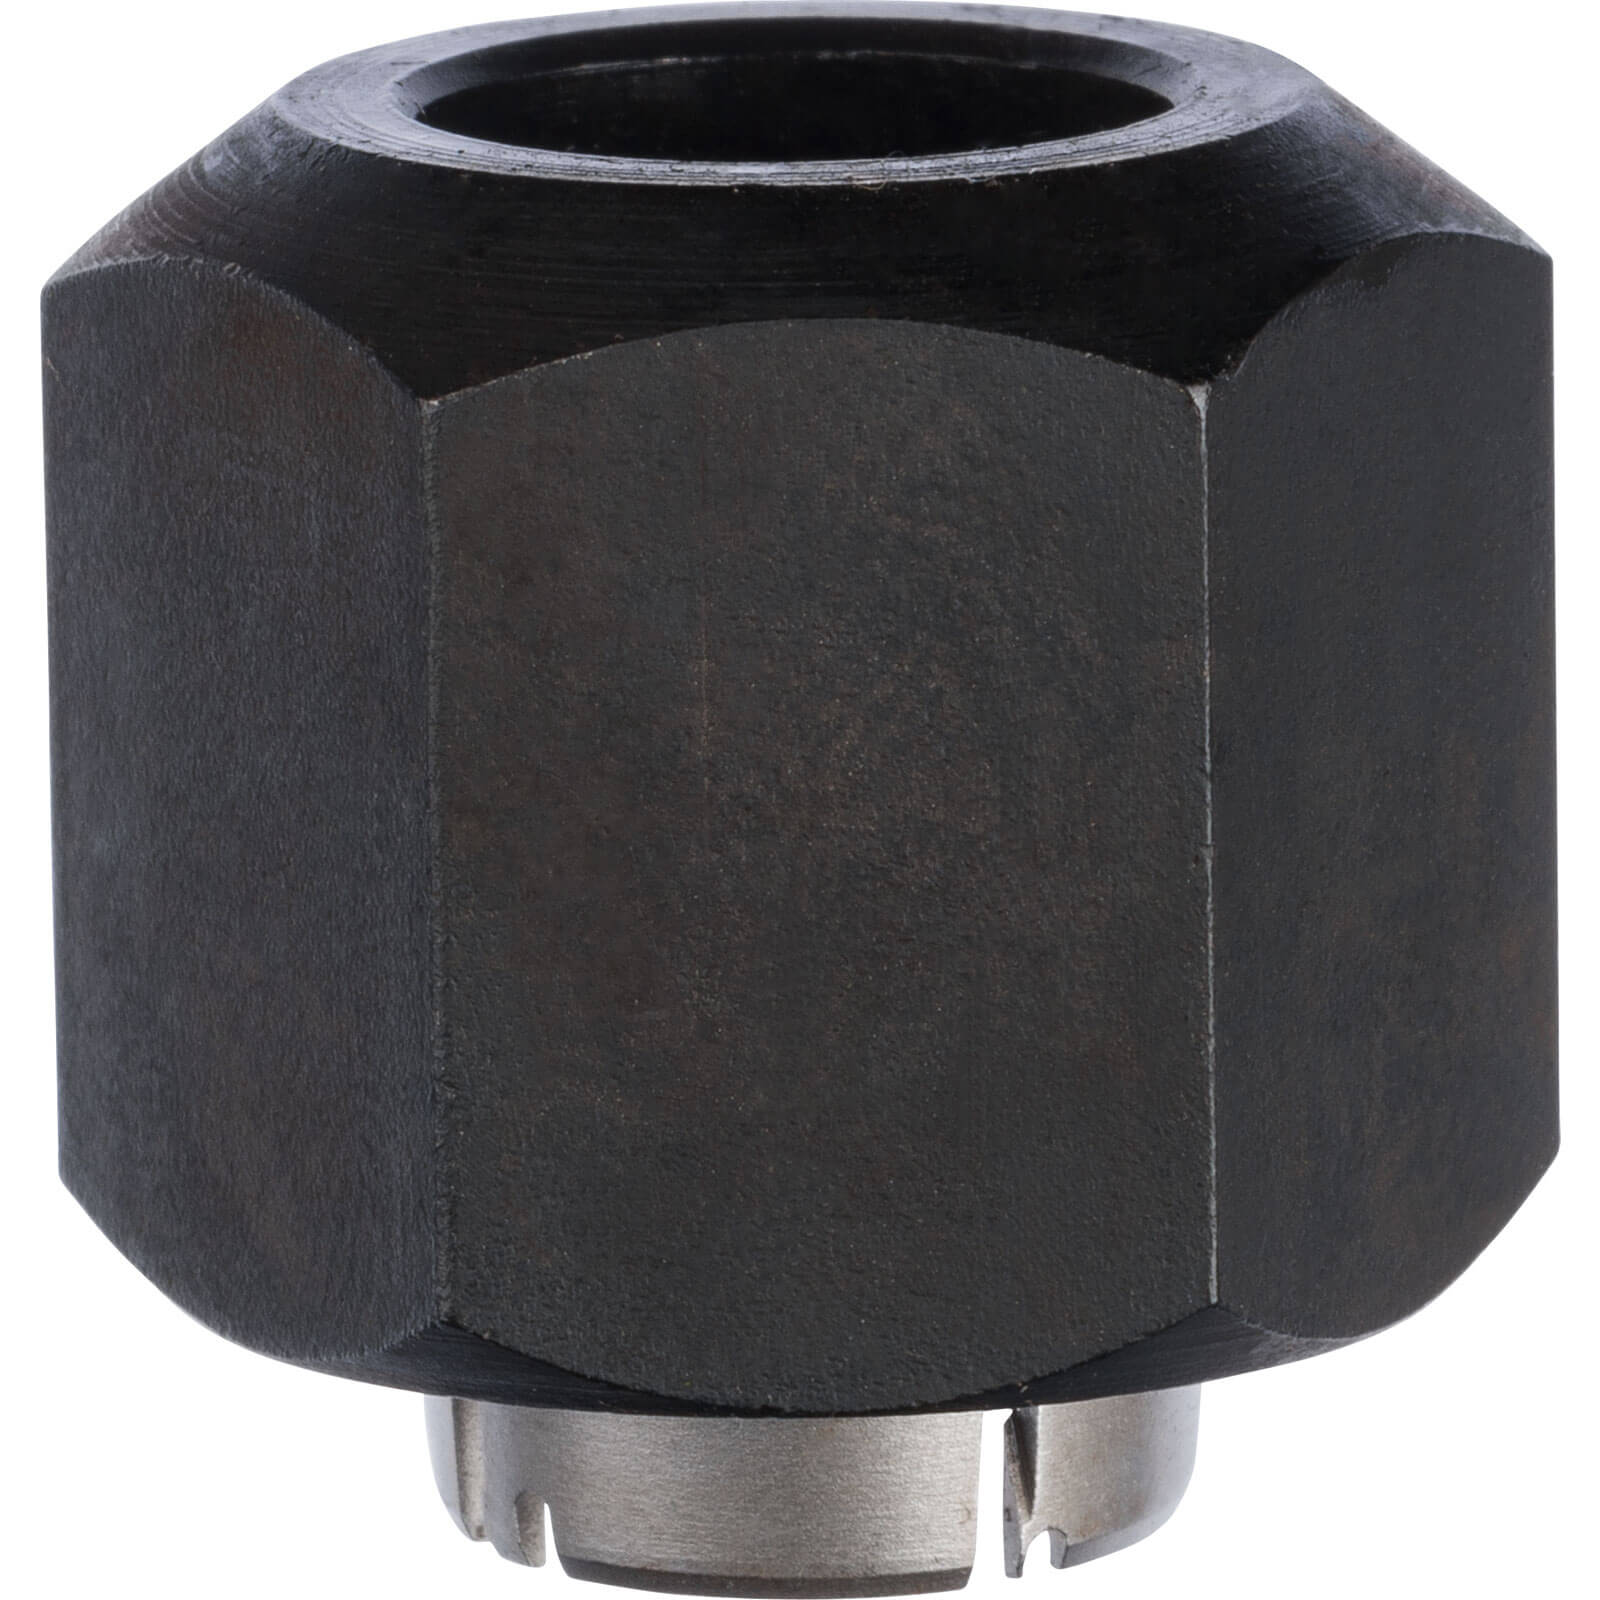 Photo of Bosch Router Collet 1/2